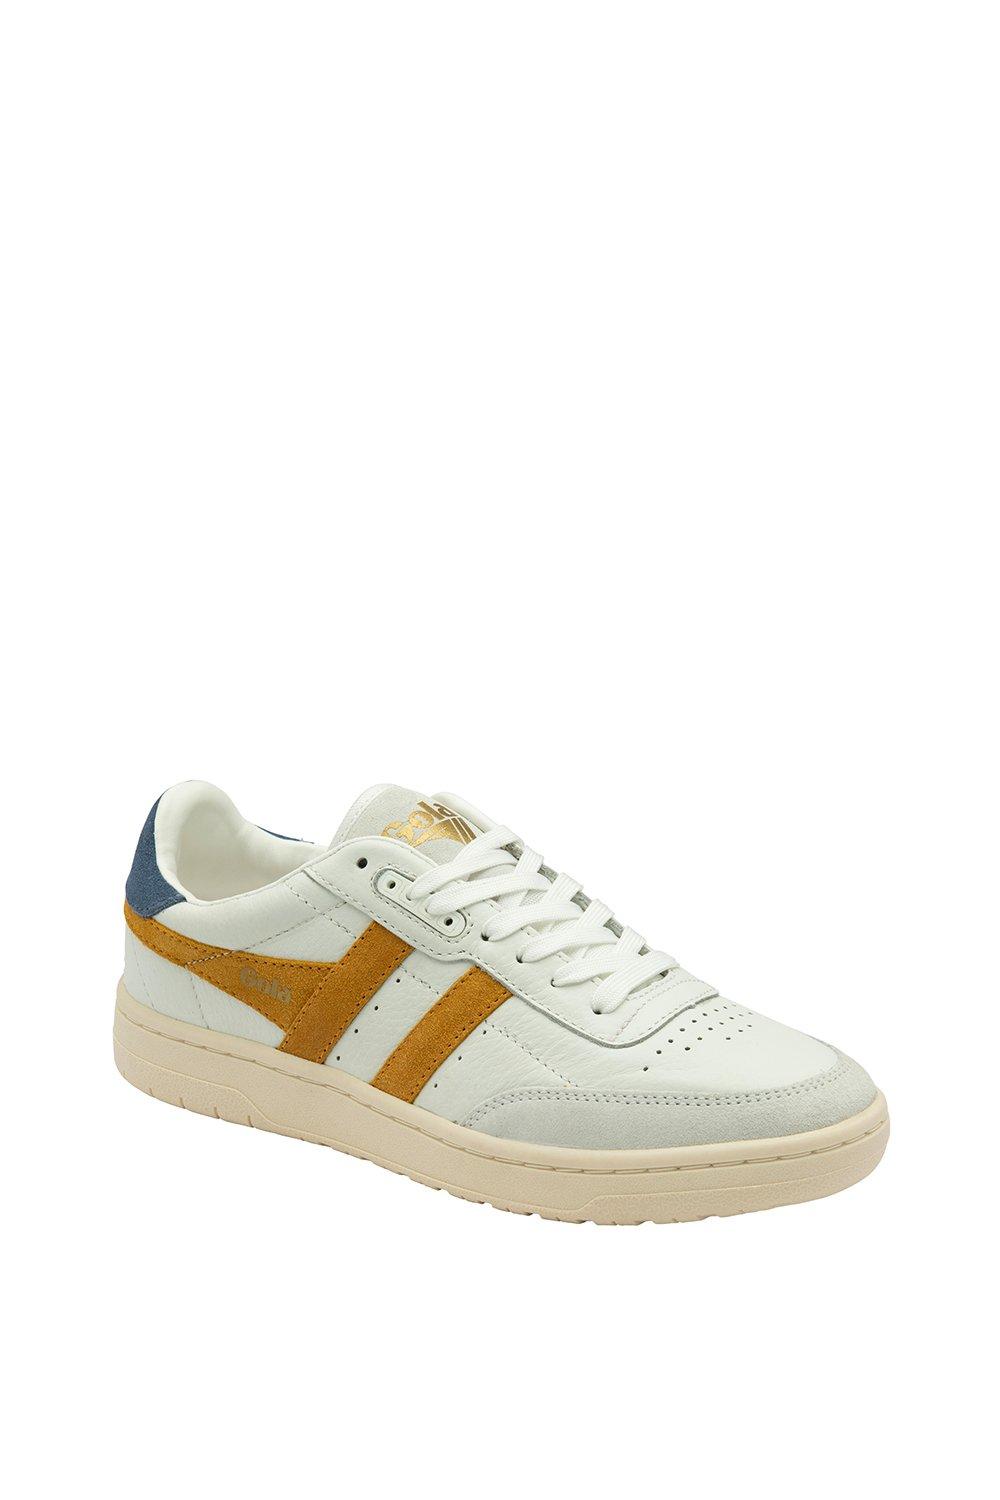 Кроссовки 'Falcon' Leather Lace-Up Trainers Gola, белый фото